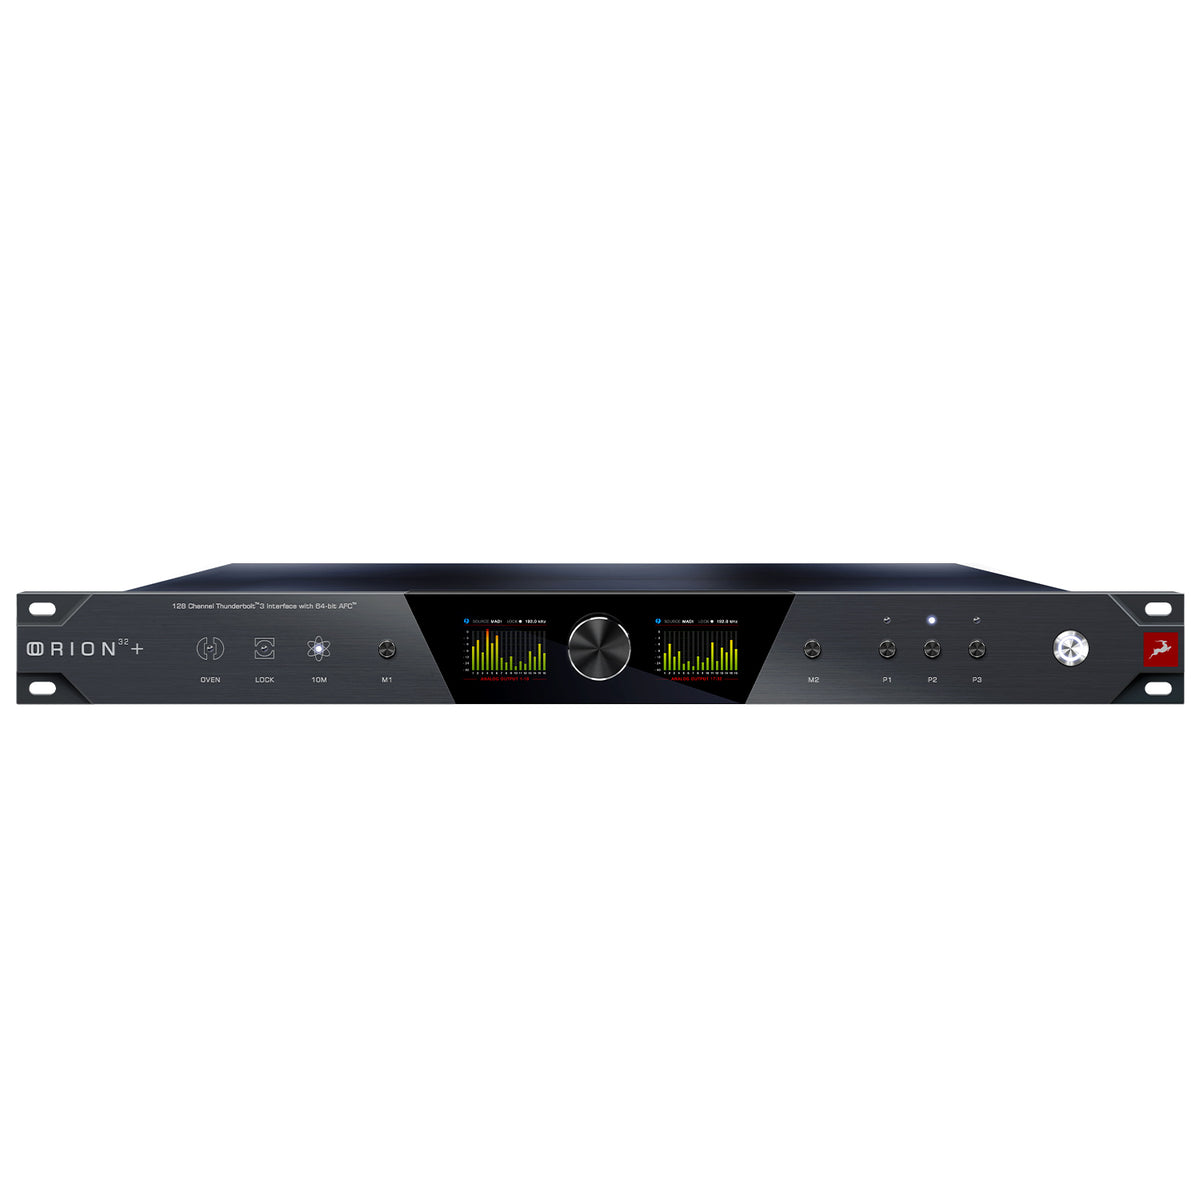 Antelope Orion 32+ Gen4 128-Channel Thunderbolt/USB Audio Interface with 64-bit AFC